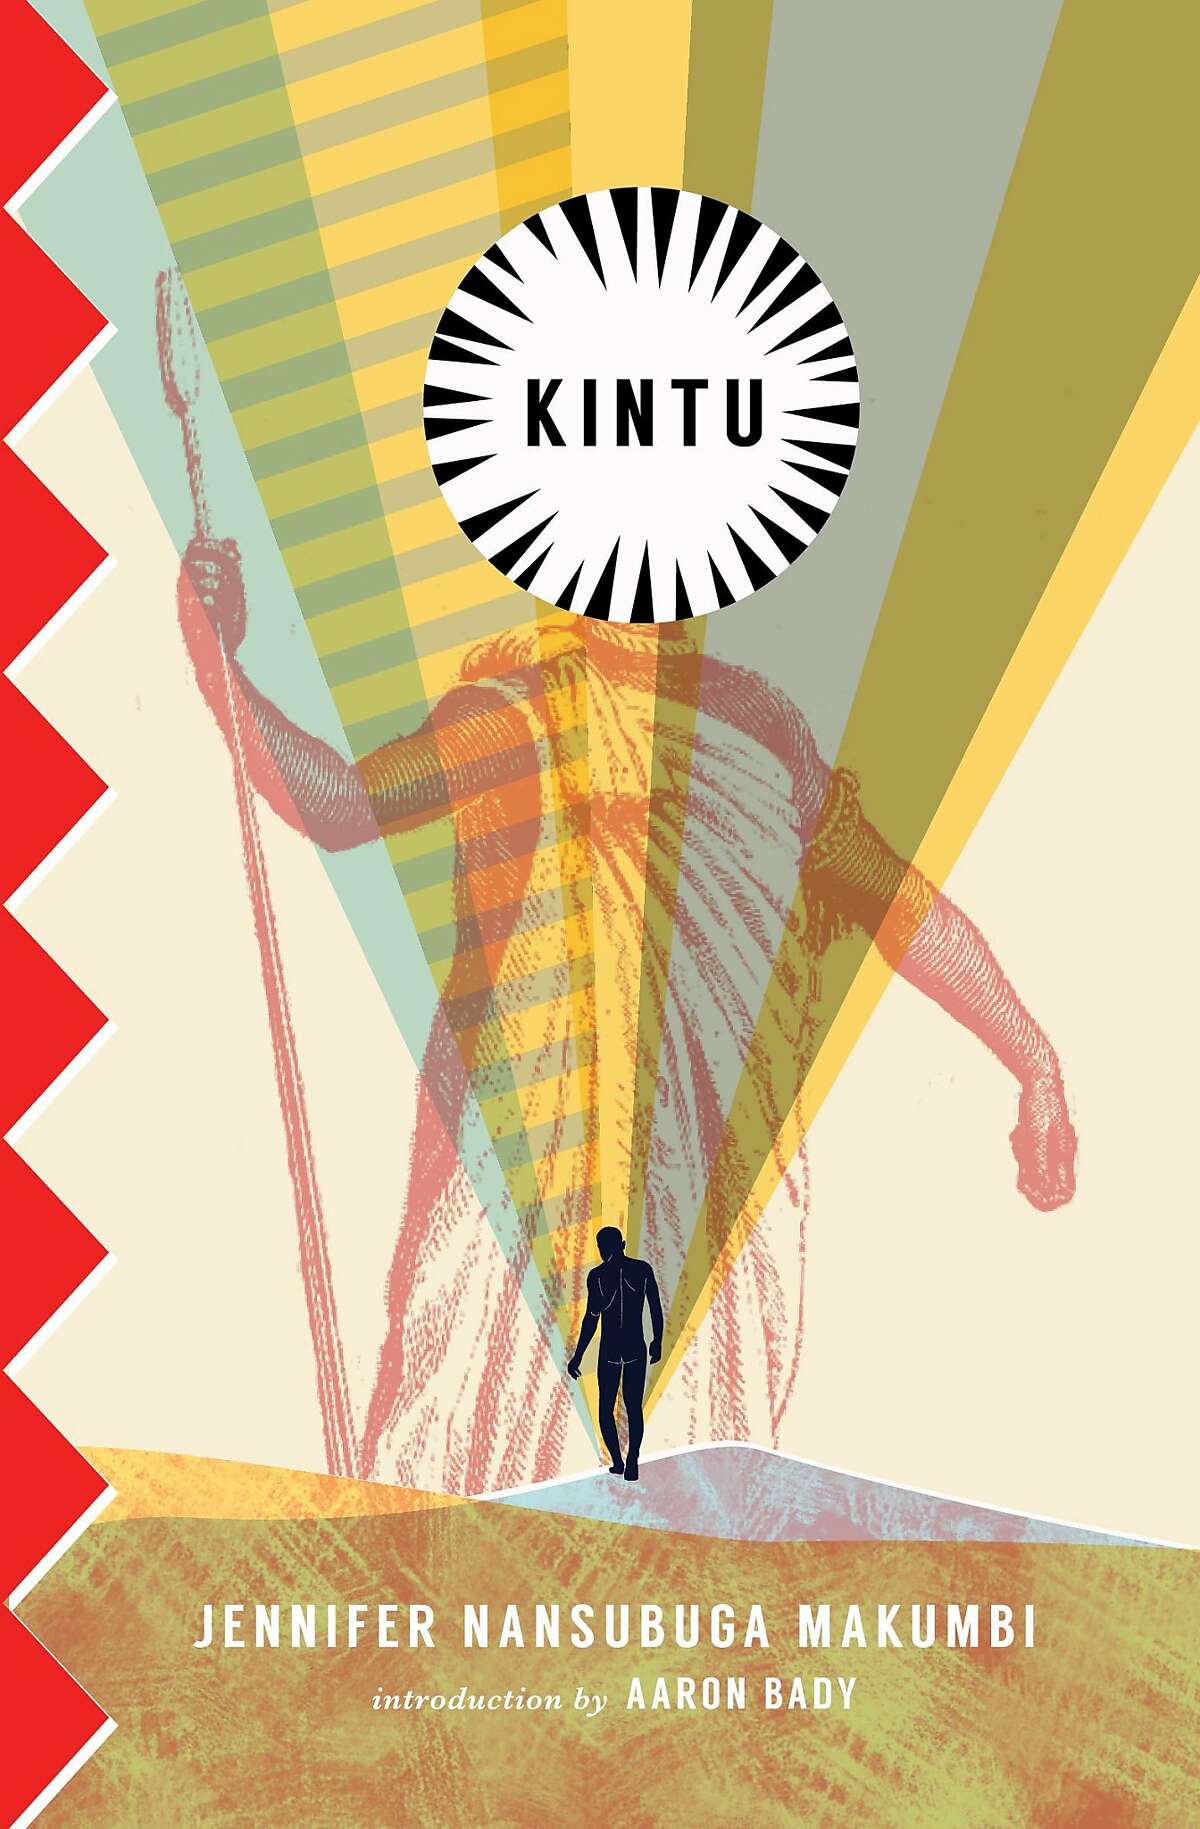 "Kintu," a historical Ugandan epic originally published in Kenya, was deemed "too African" by Western publishers -- until Transit Books picked it up.